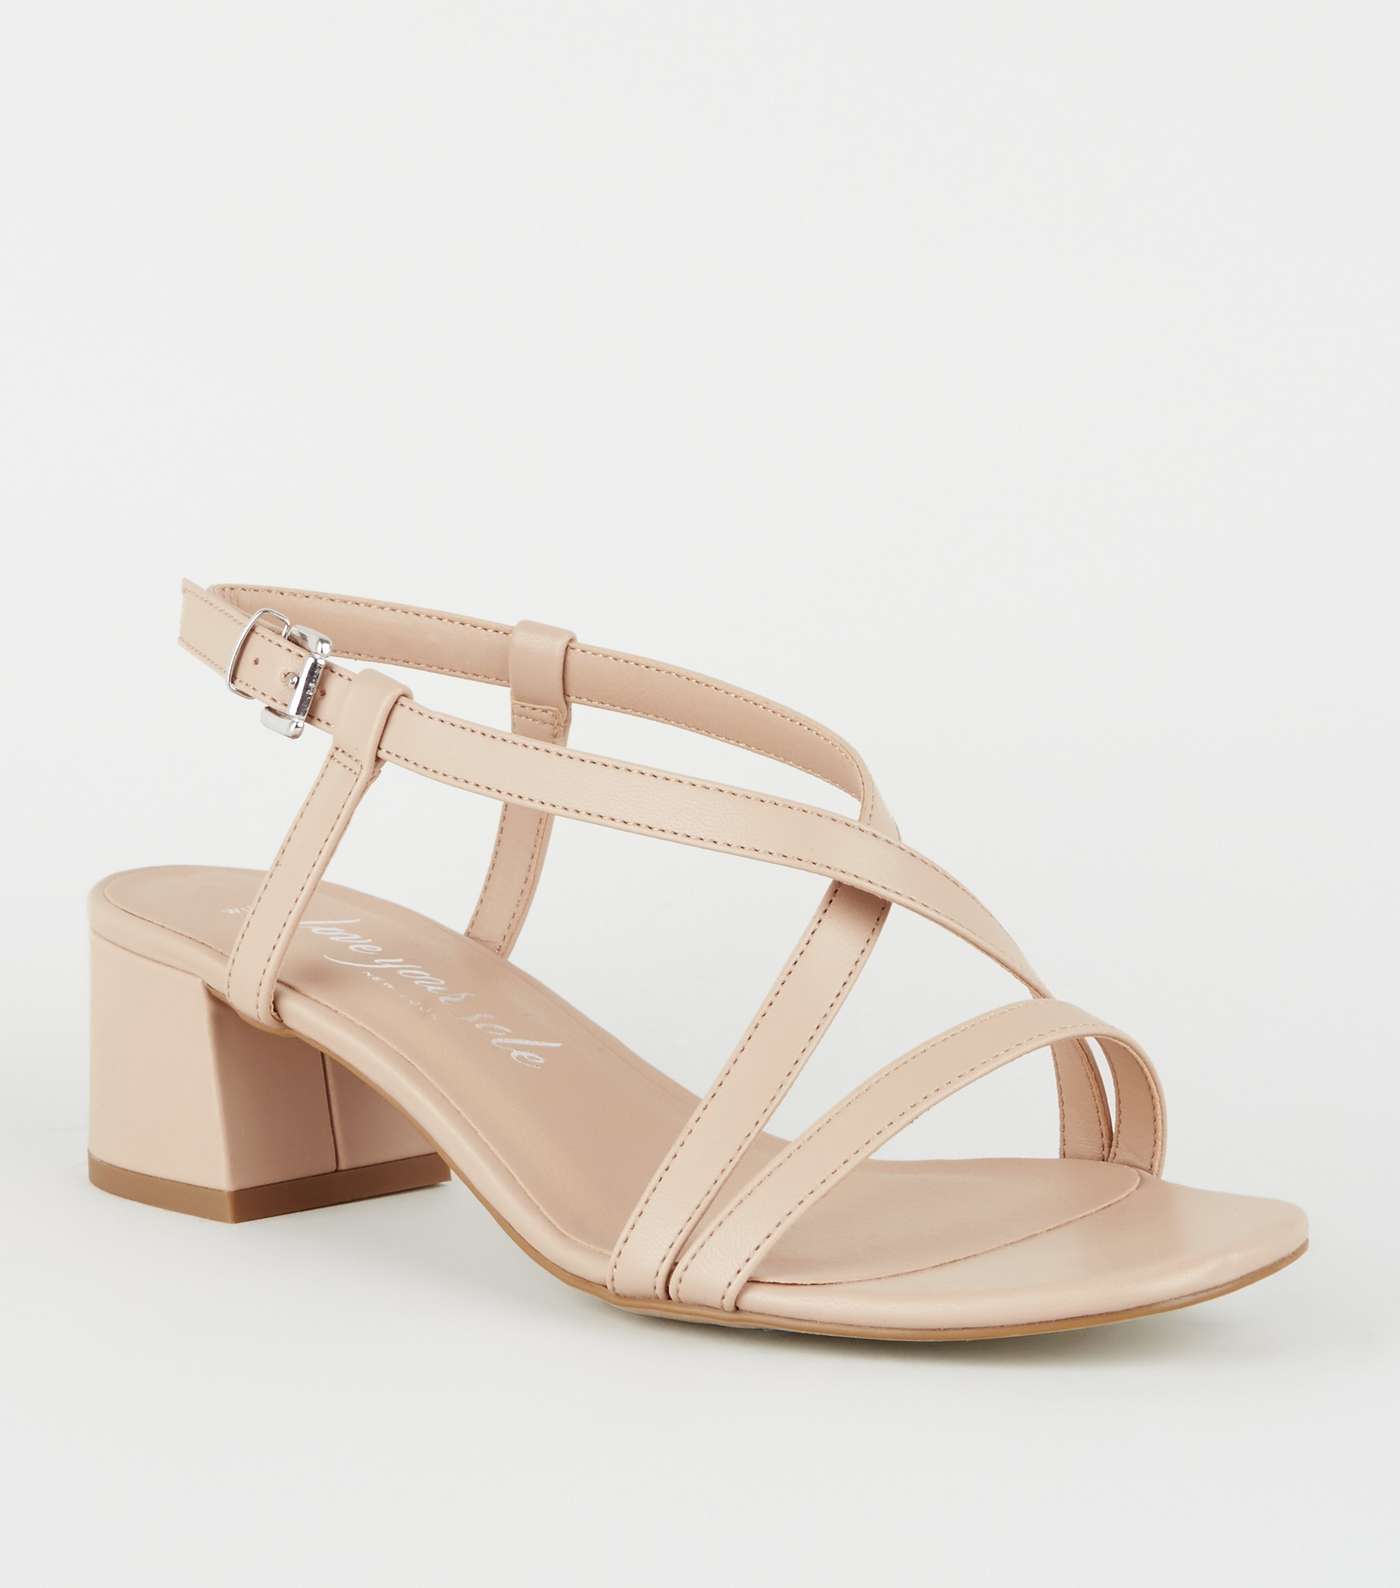 Wide Fit Camel Strappy Low Heel Sandals